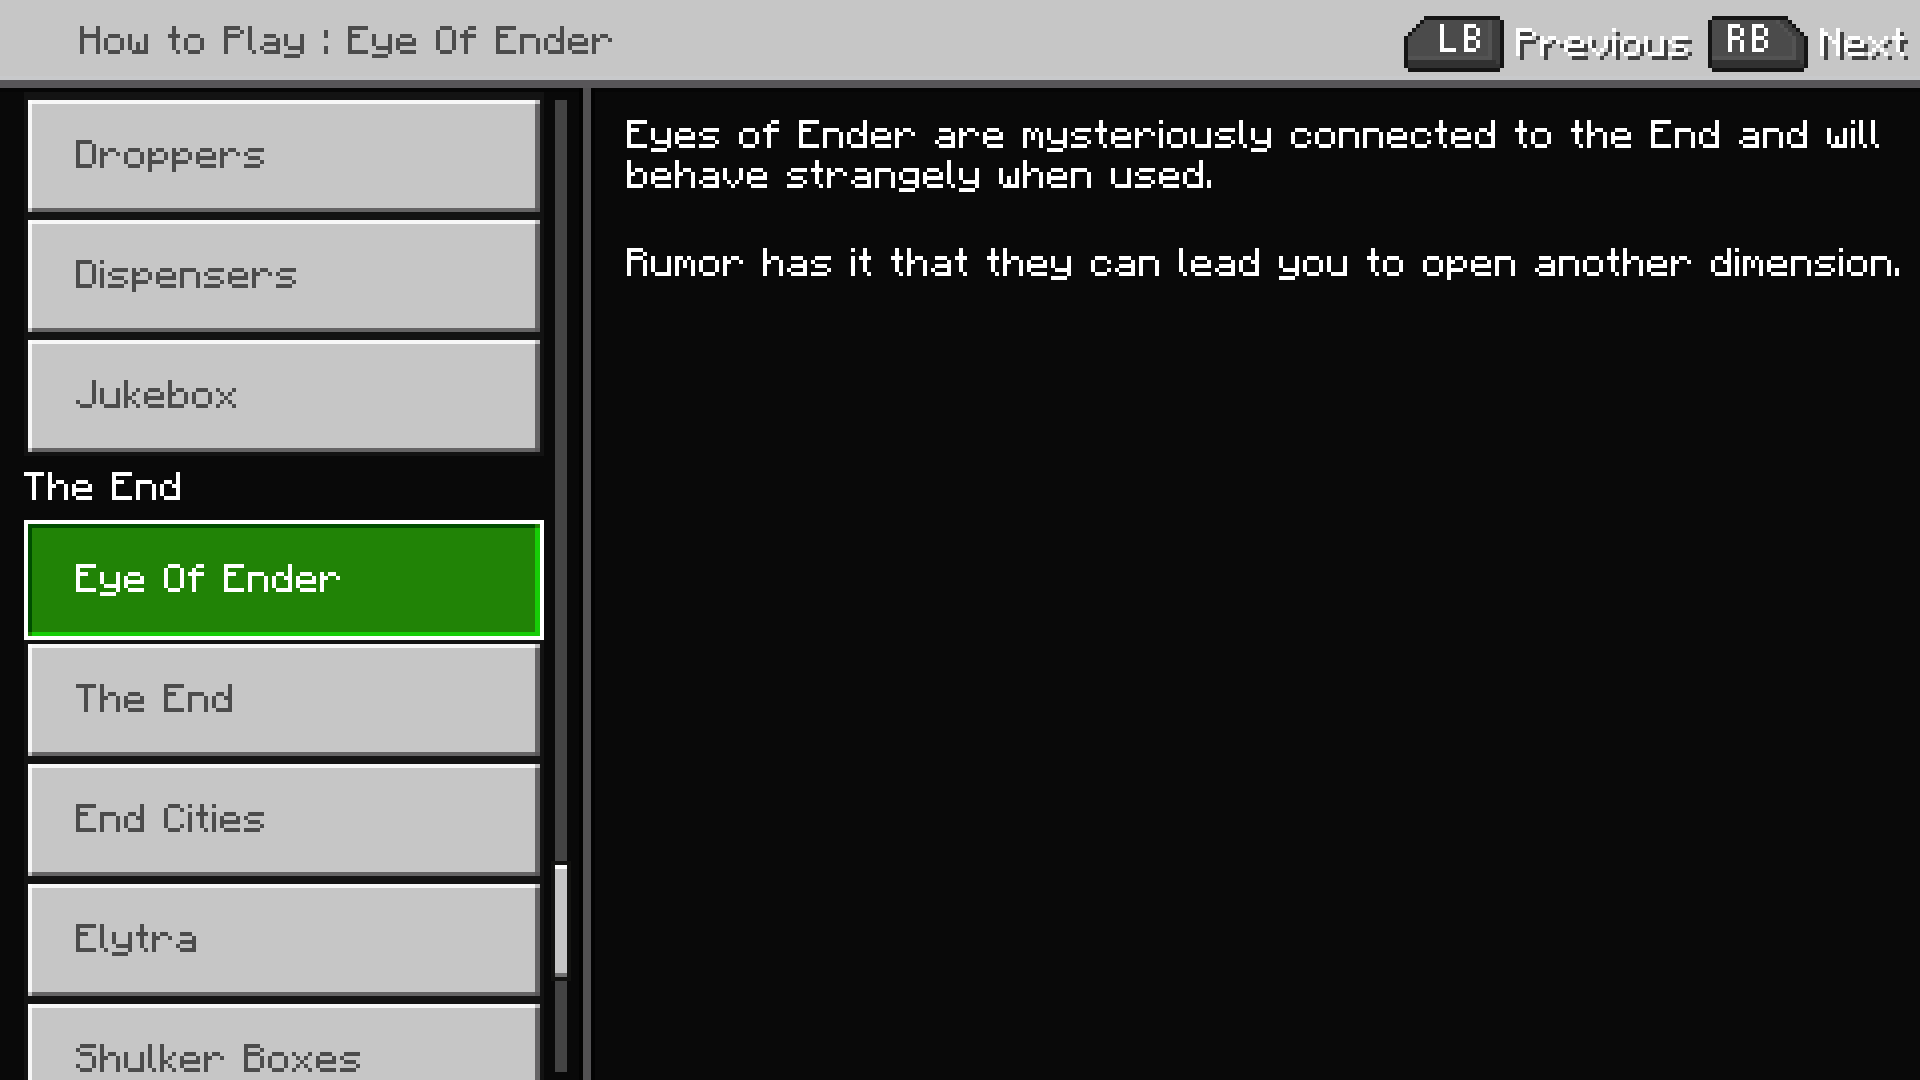 Minecraft screenshot of how to play menu with list of items on left. The focus is on "Eye of Ender" and a description of that item appears on the right reading, "Eyes of Ender are mysteriously connected to the End and will behave strangely when used. Rumor has it that they can lead you to open another dimension."